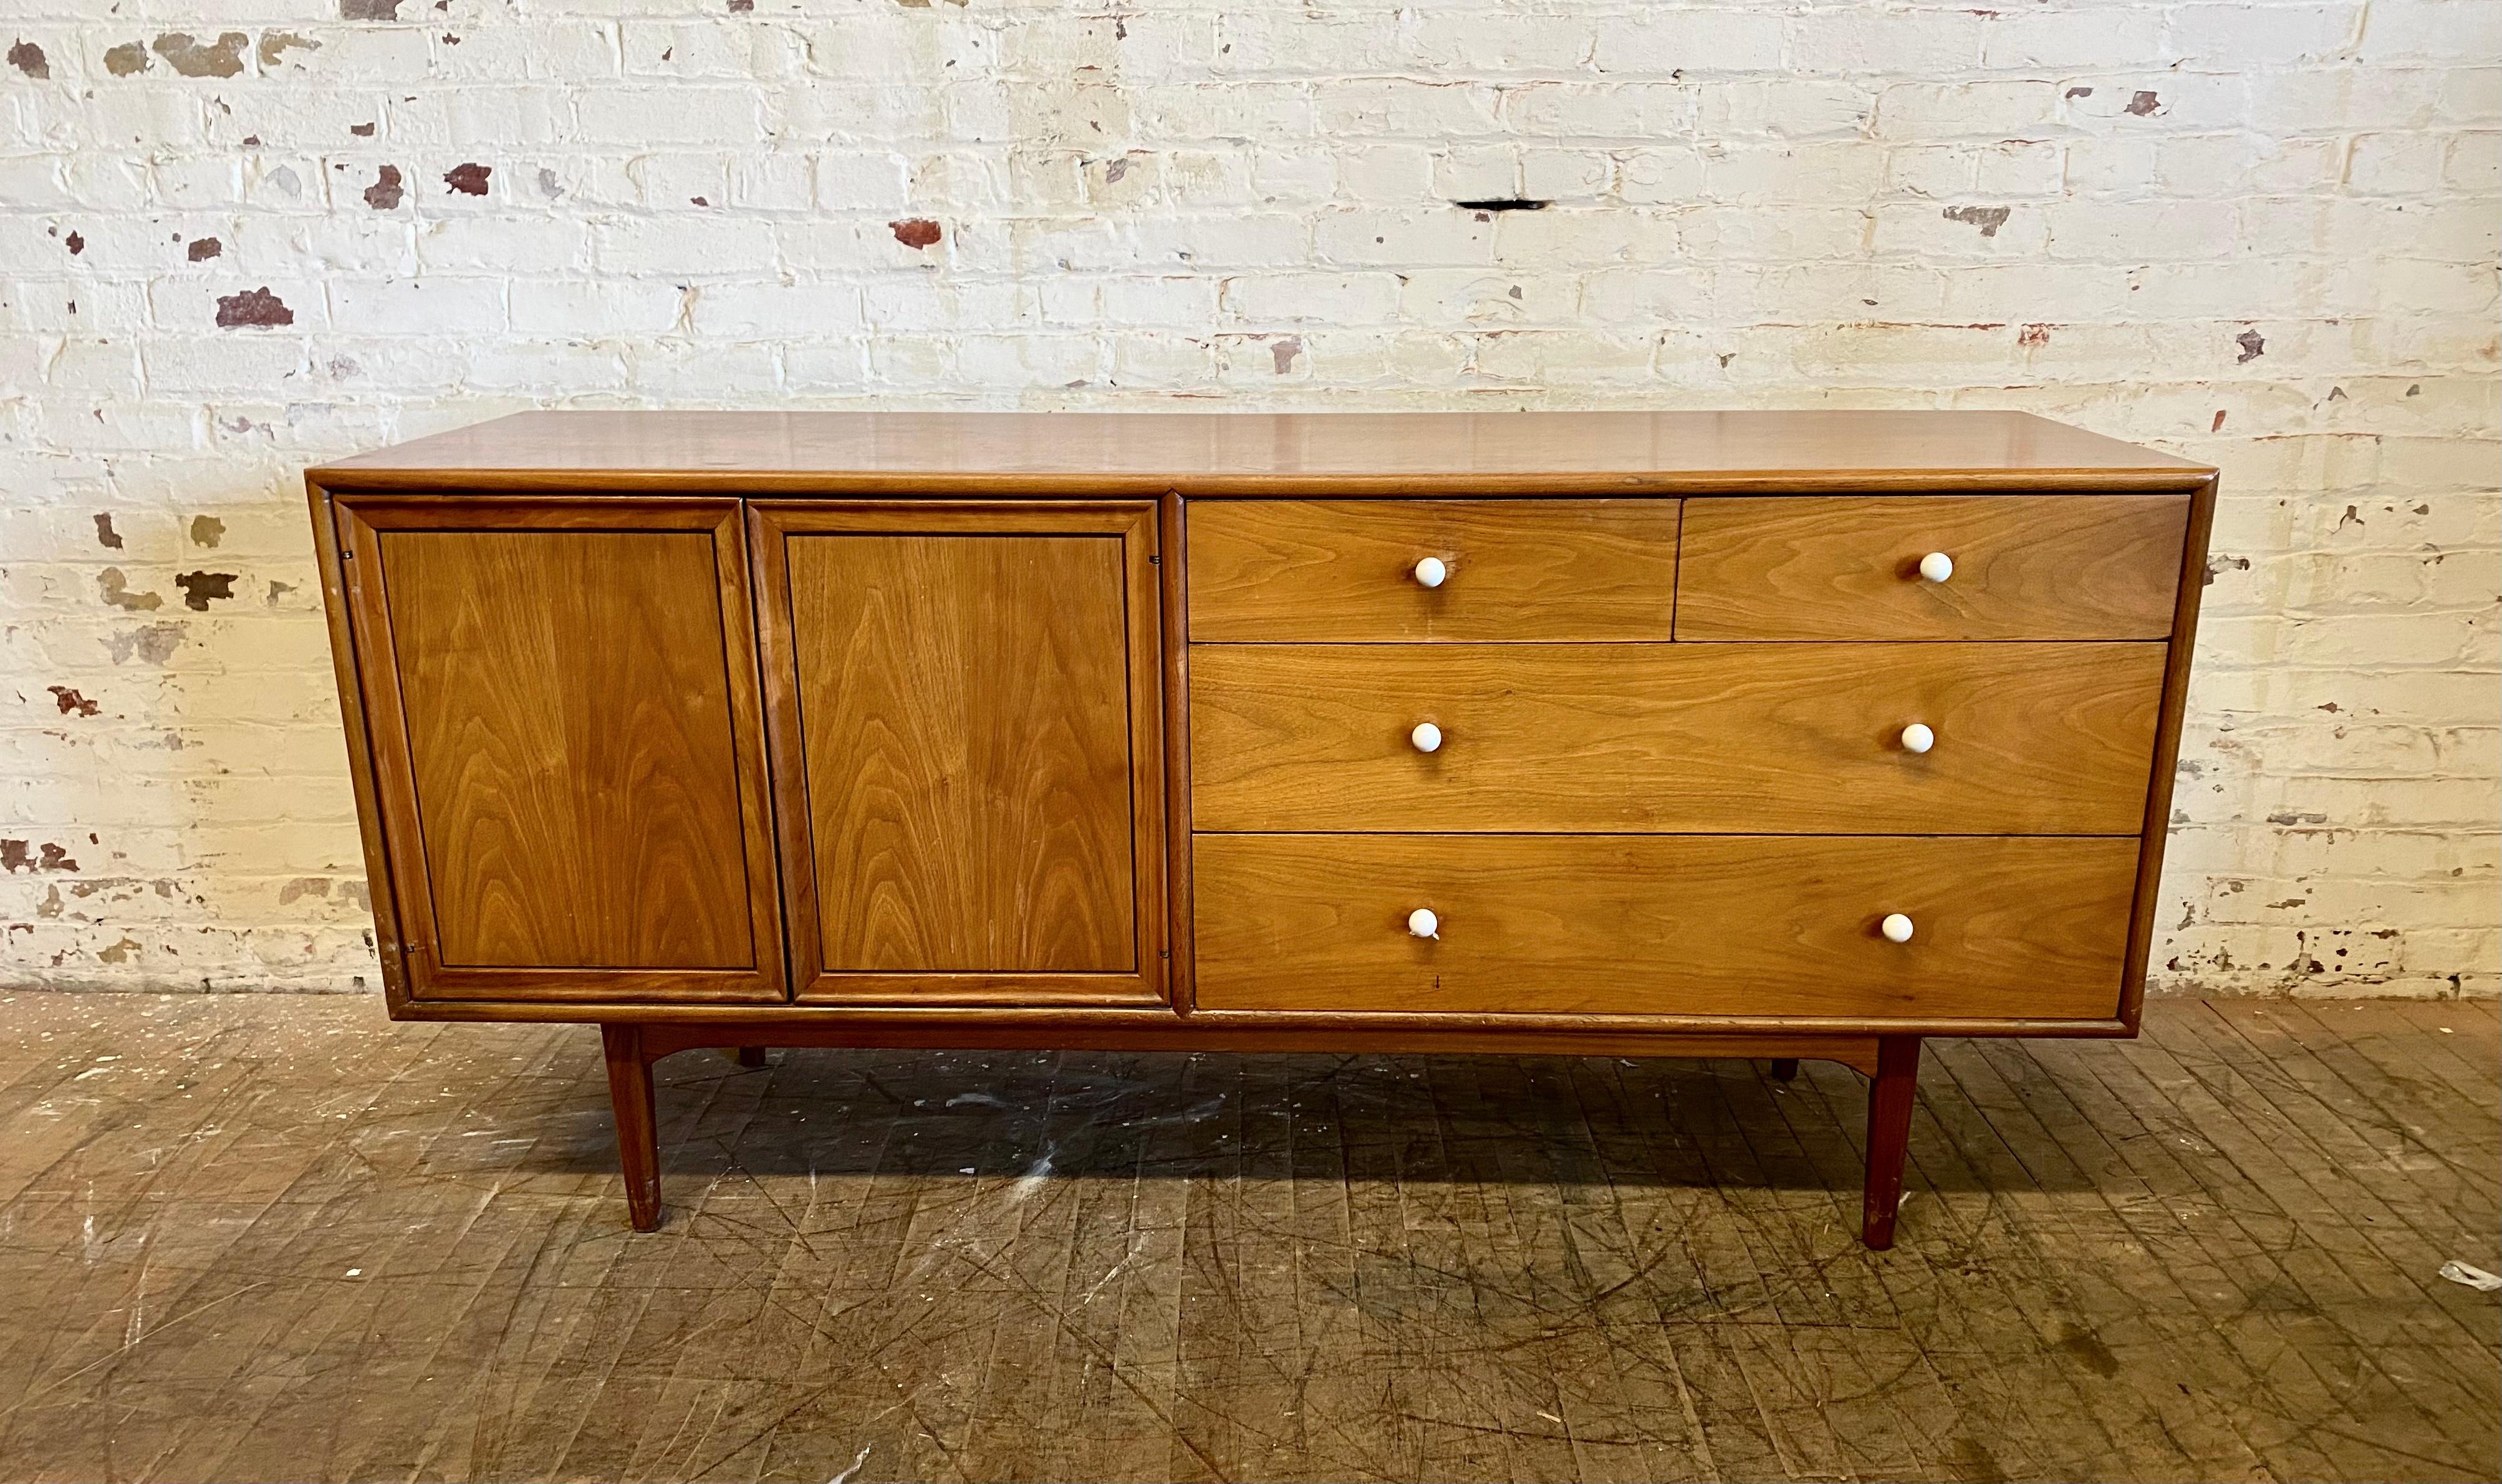 Ten-drawer dresser by Kip Stewart and Stewart MacDougall for their Drexel Declaration collection. Four exposed drawers with original spherical porcelain knobs and brass spacers. Six more drawers are revealed when pair of doors open, minor blemishes